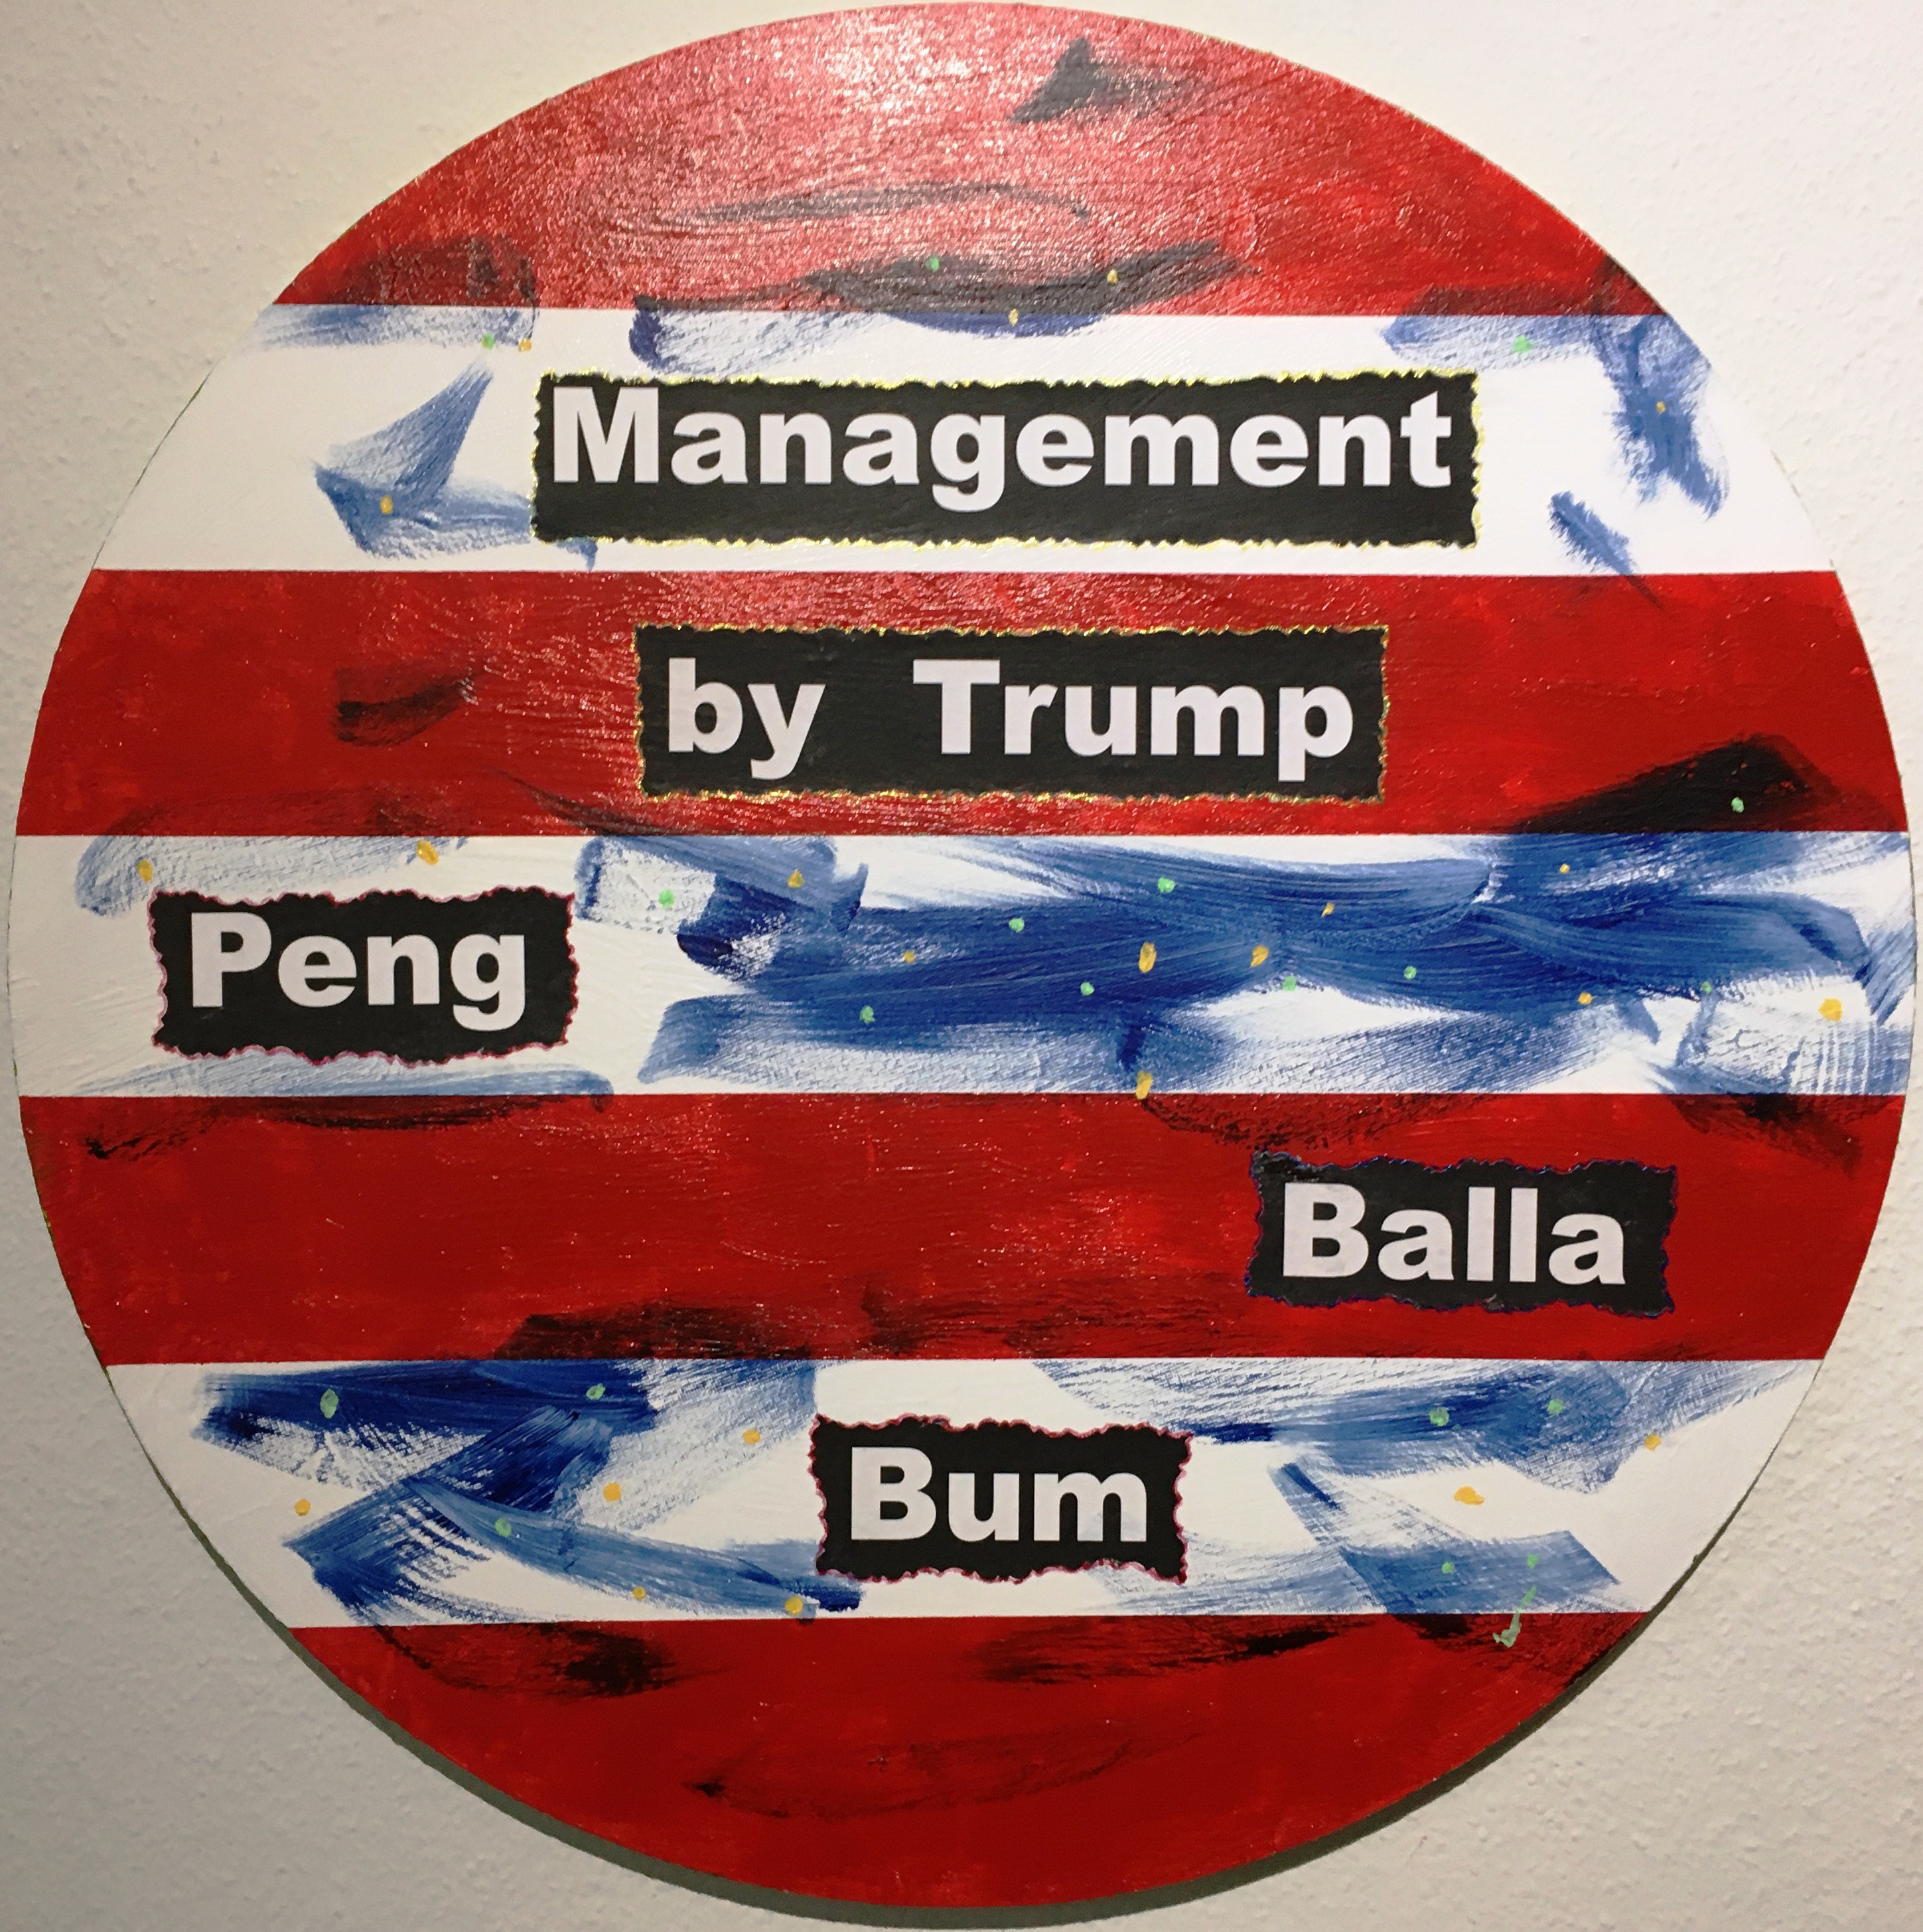 Management by Trump